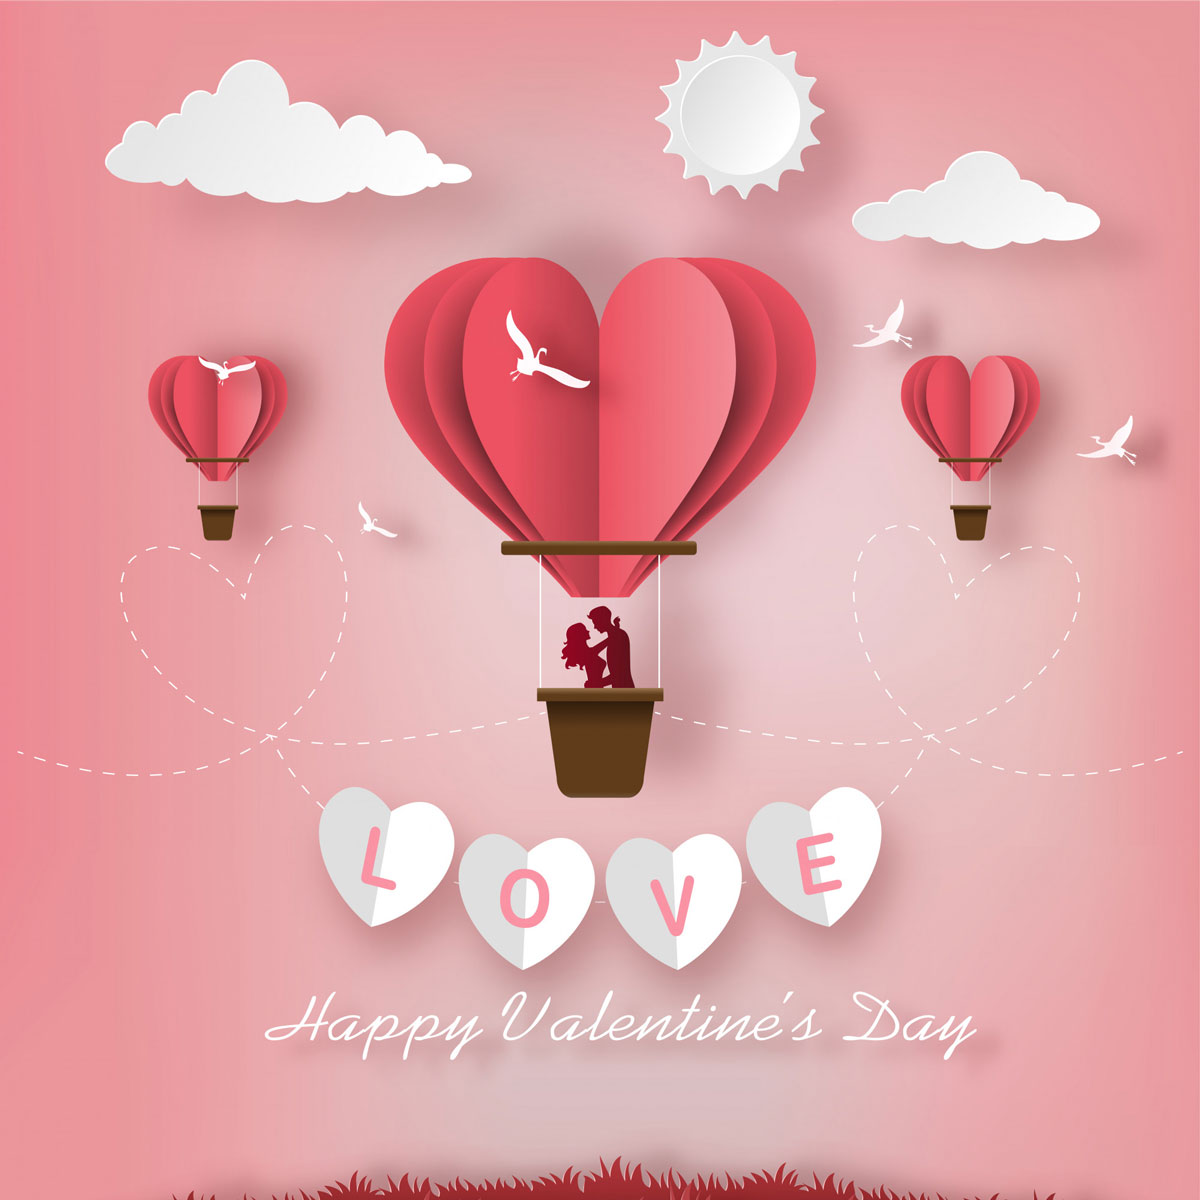 Happy Valentine's Day 2023: Wishes, Quotes & Messages You Can Send On  WhatsApp To Your Partner, Husband & Wife, Happy Valentine day images,  Facebook status